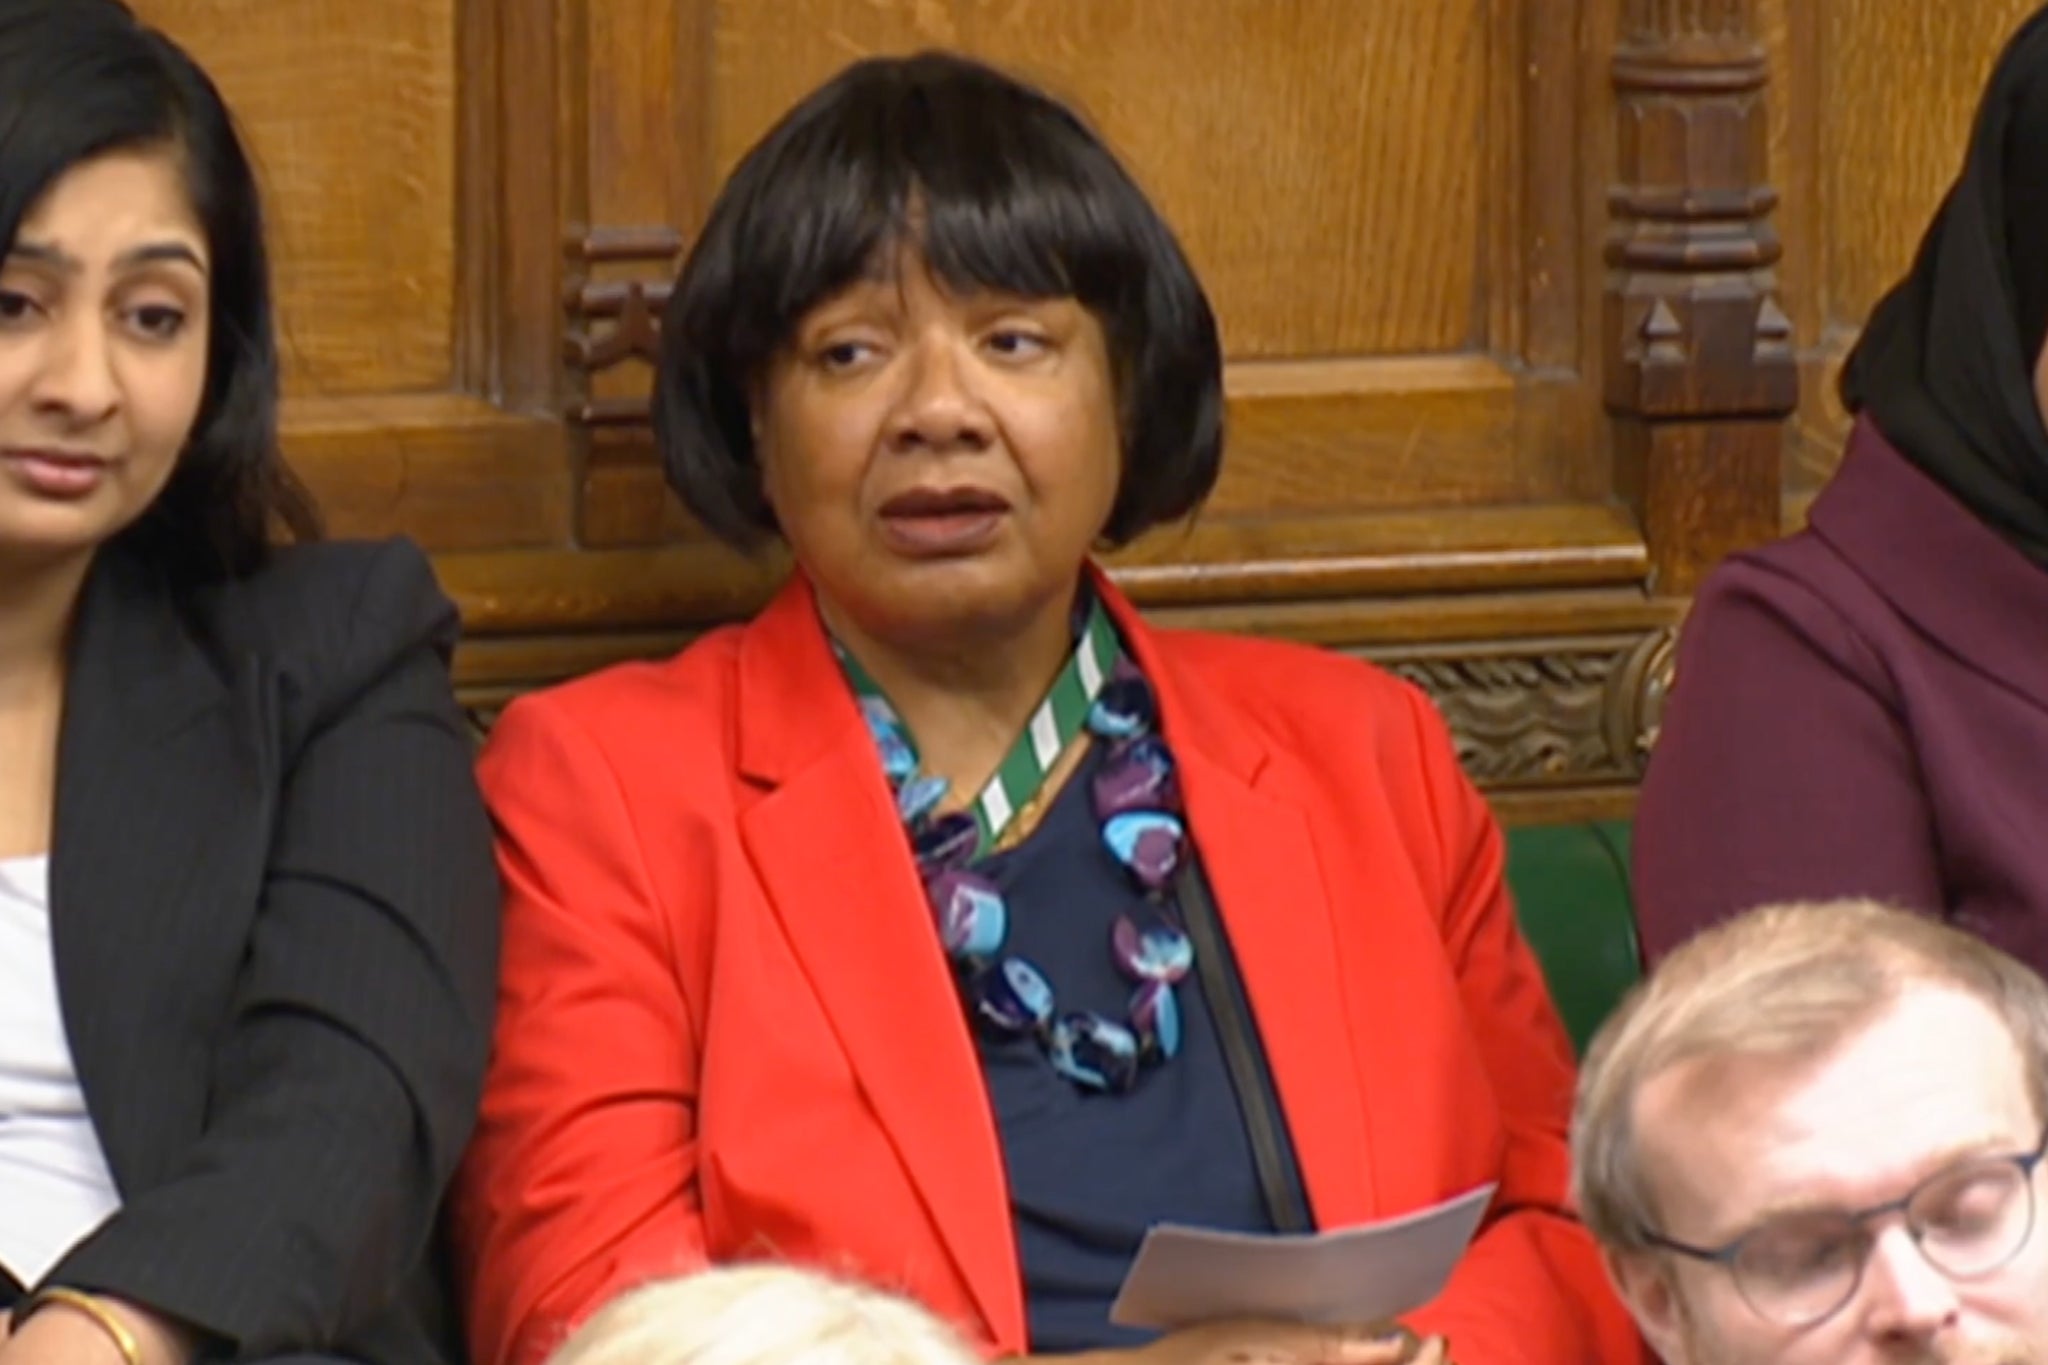 Diane Abbott: ‘As many people will know, this is not the first time I have been subjected to both types of abuse’